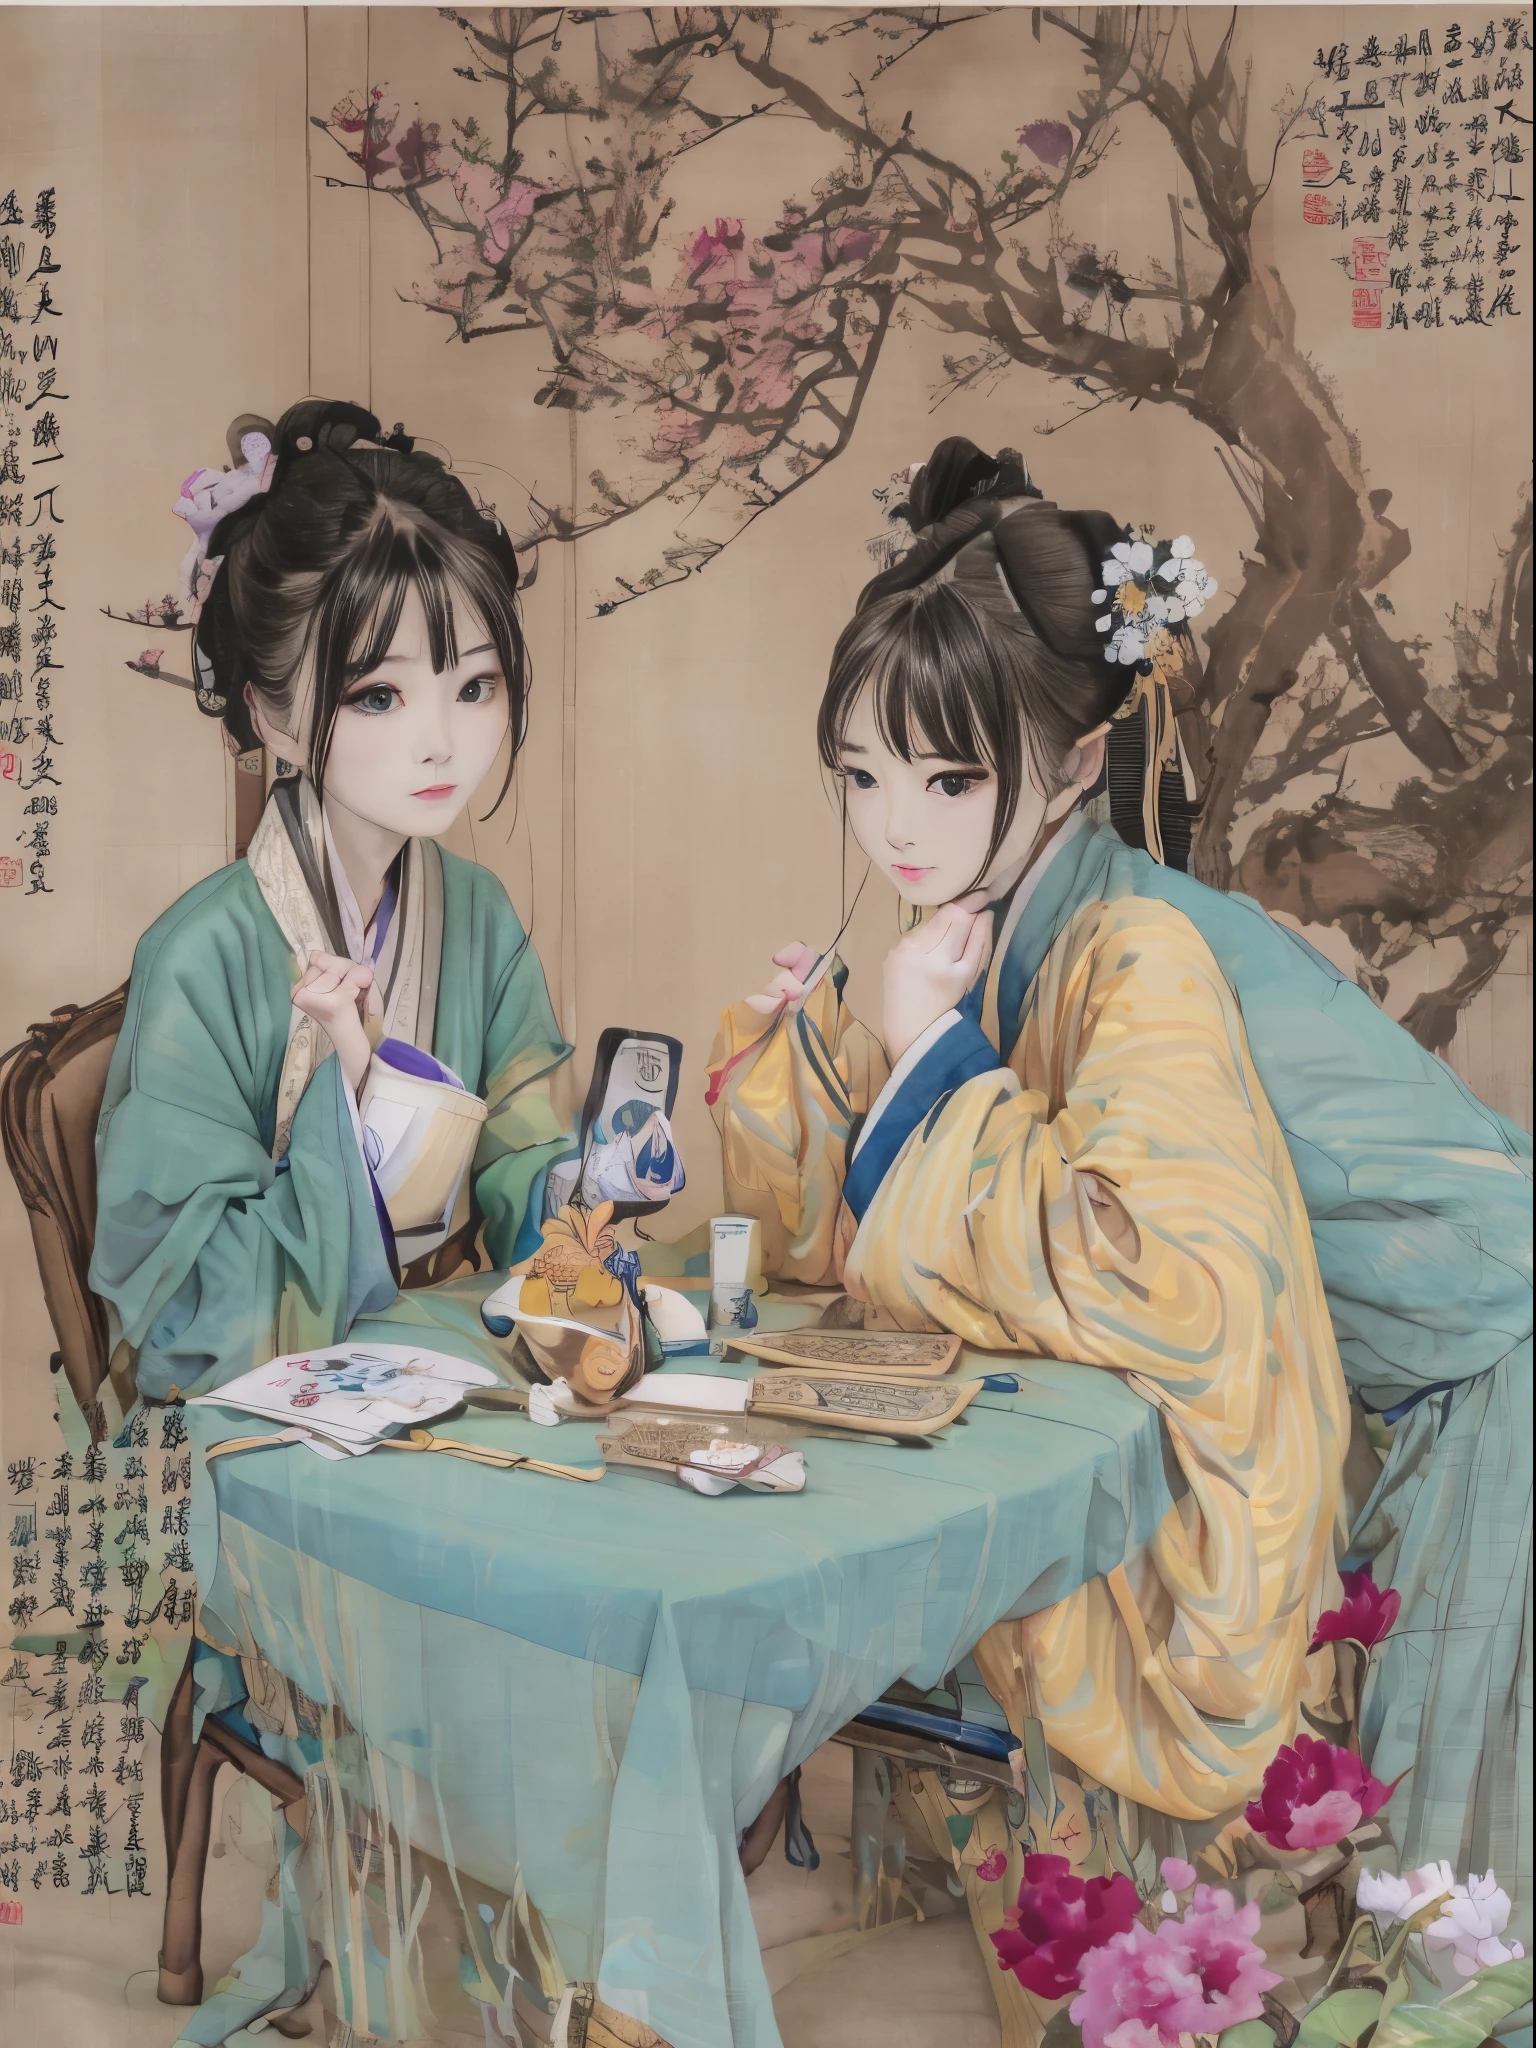 a close up of a full colour painting of people in a landscape, ancient chinese beauties, qing dynasty painting, by Wang Lü, su fu, mu pan, by Lü Ji, song dynasty, ancient china art style, chinese painting, robed figures sat around a table, by Wang Hui, by Yun Du-seo, old chines painting, traditional chinese painting, holding a cat, lace,